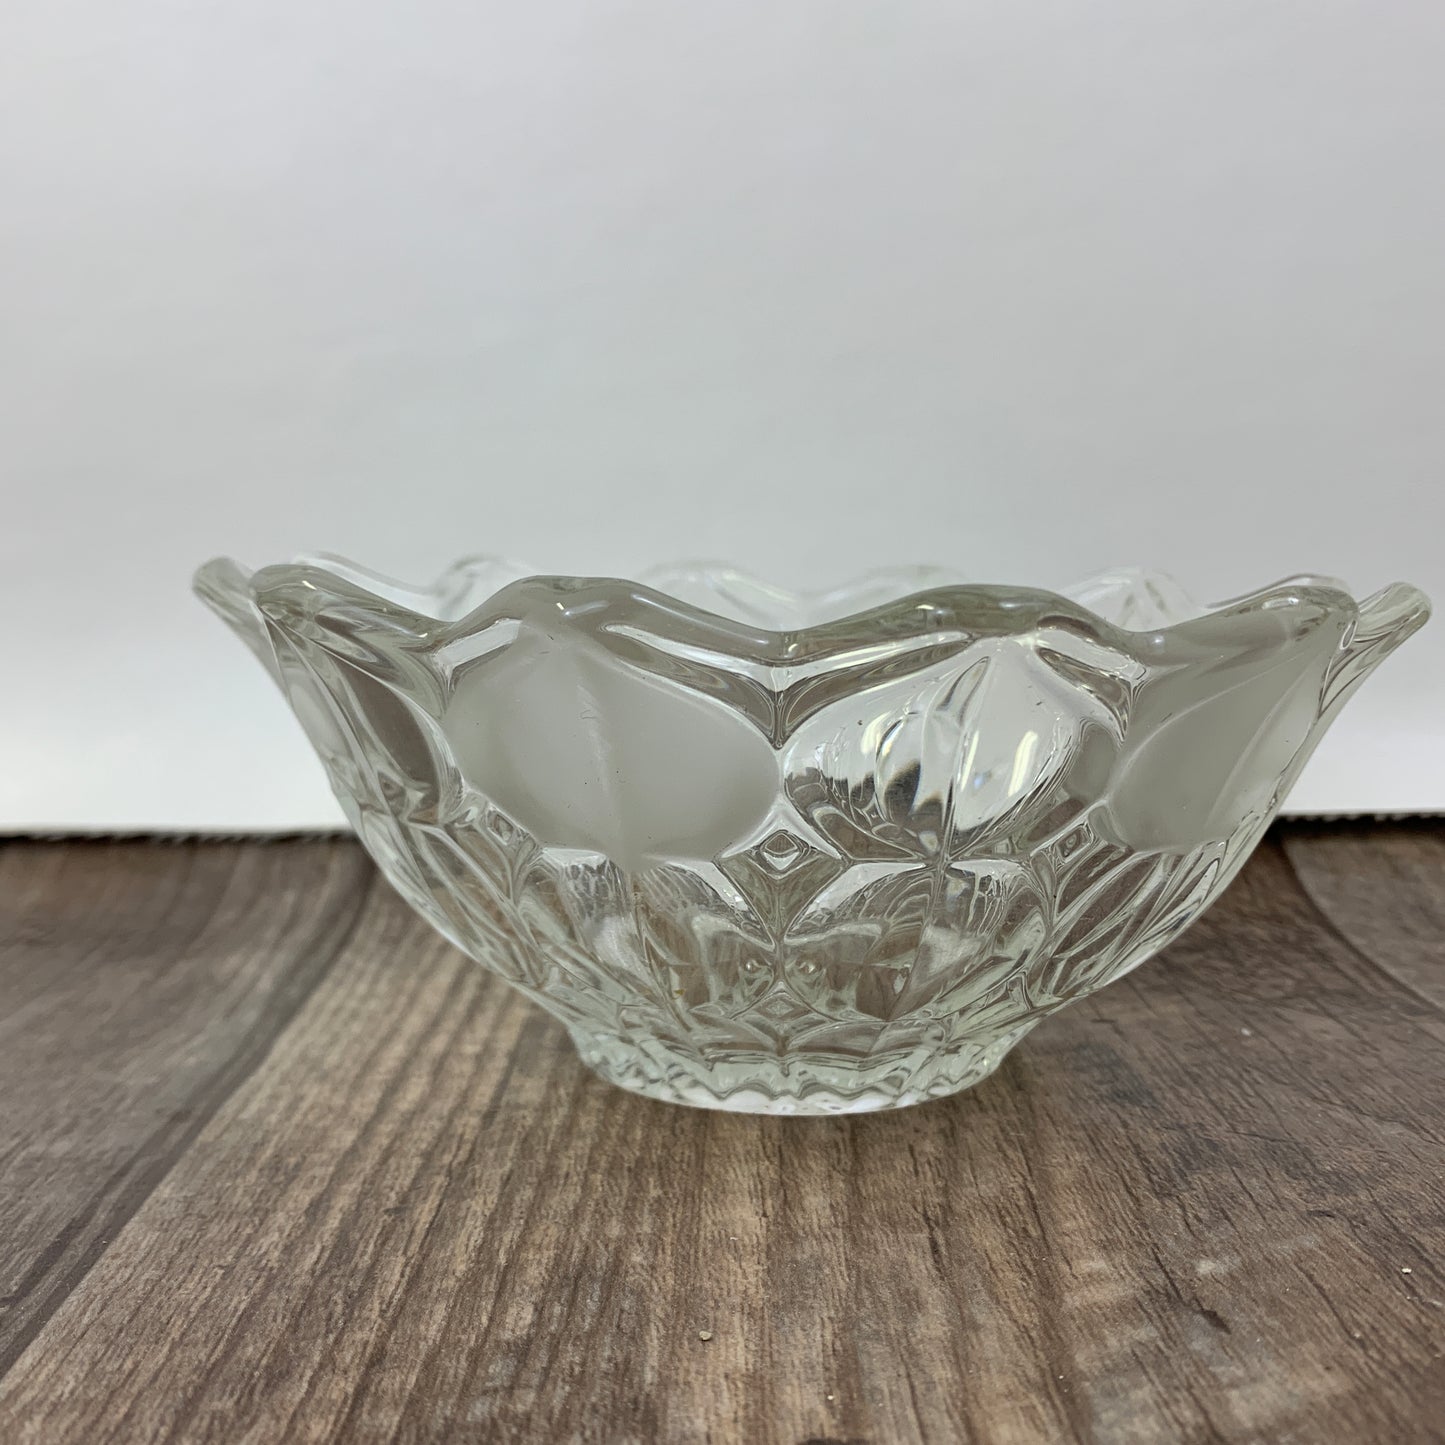 Clear Glass Bowl with Thumbprint Pattern, Small Vintage Serving Bowl